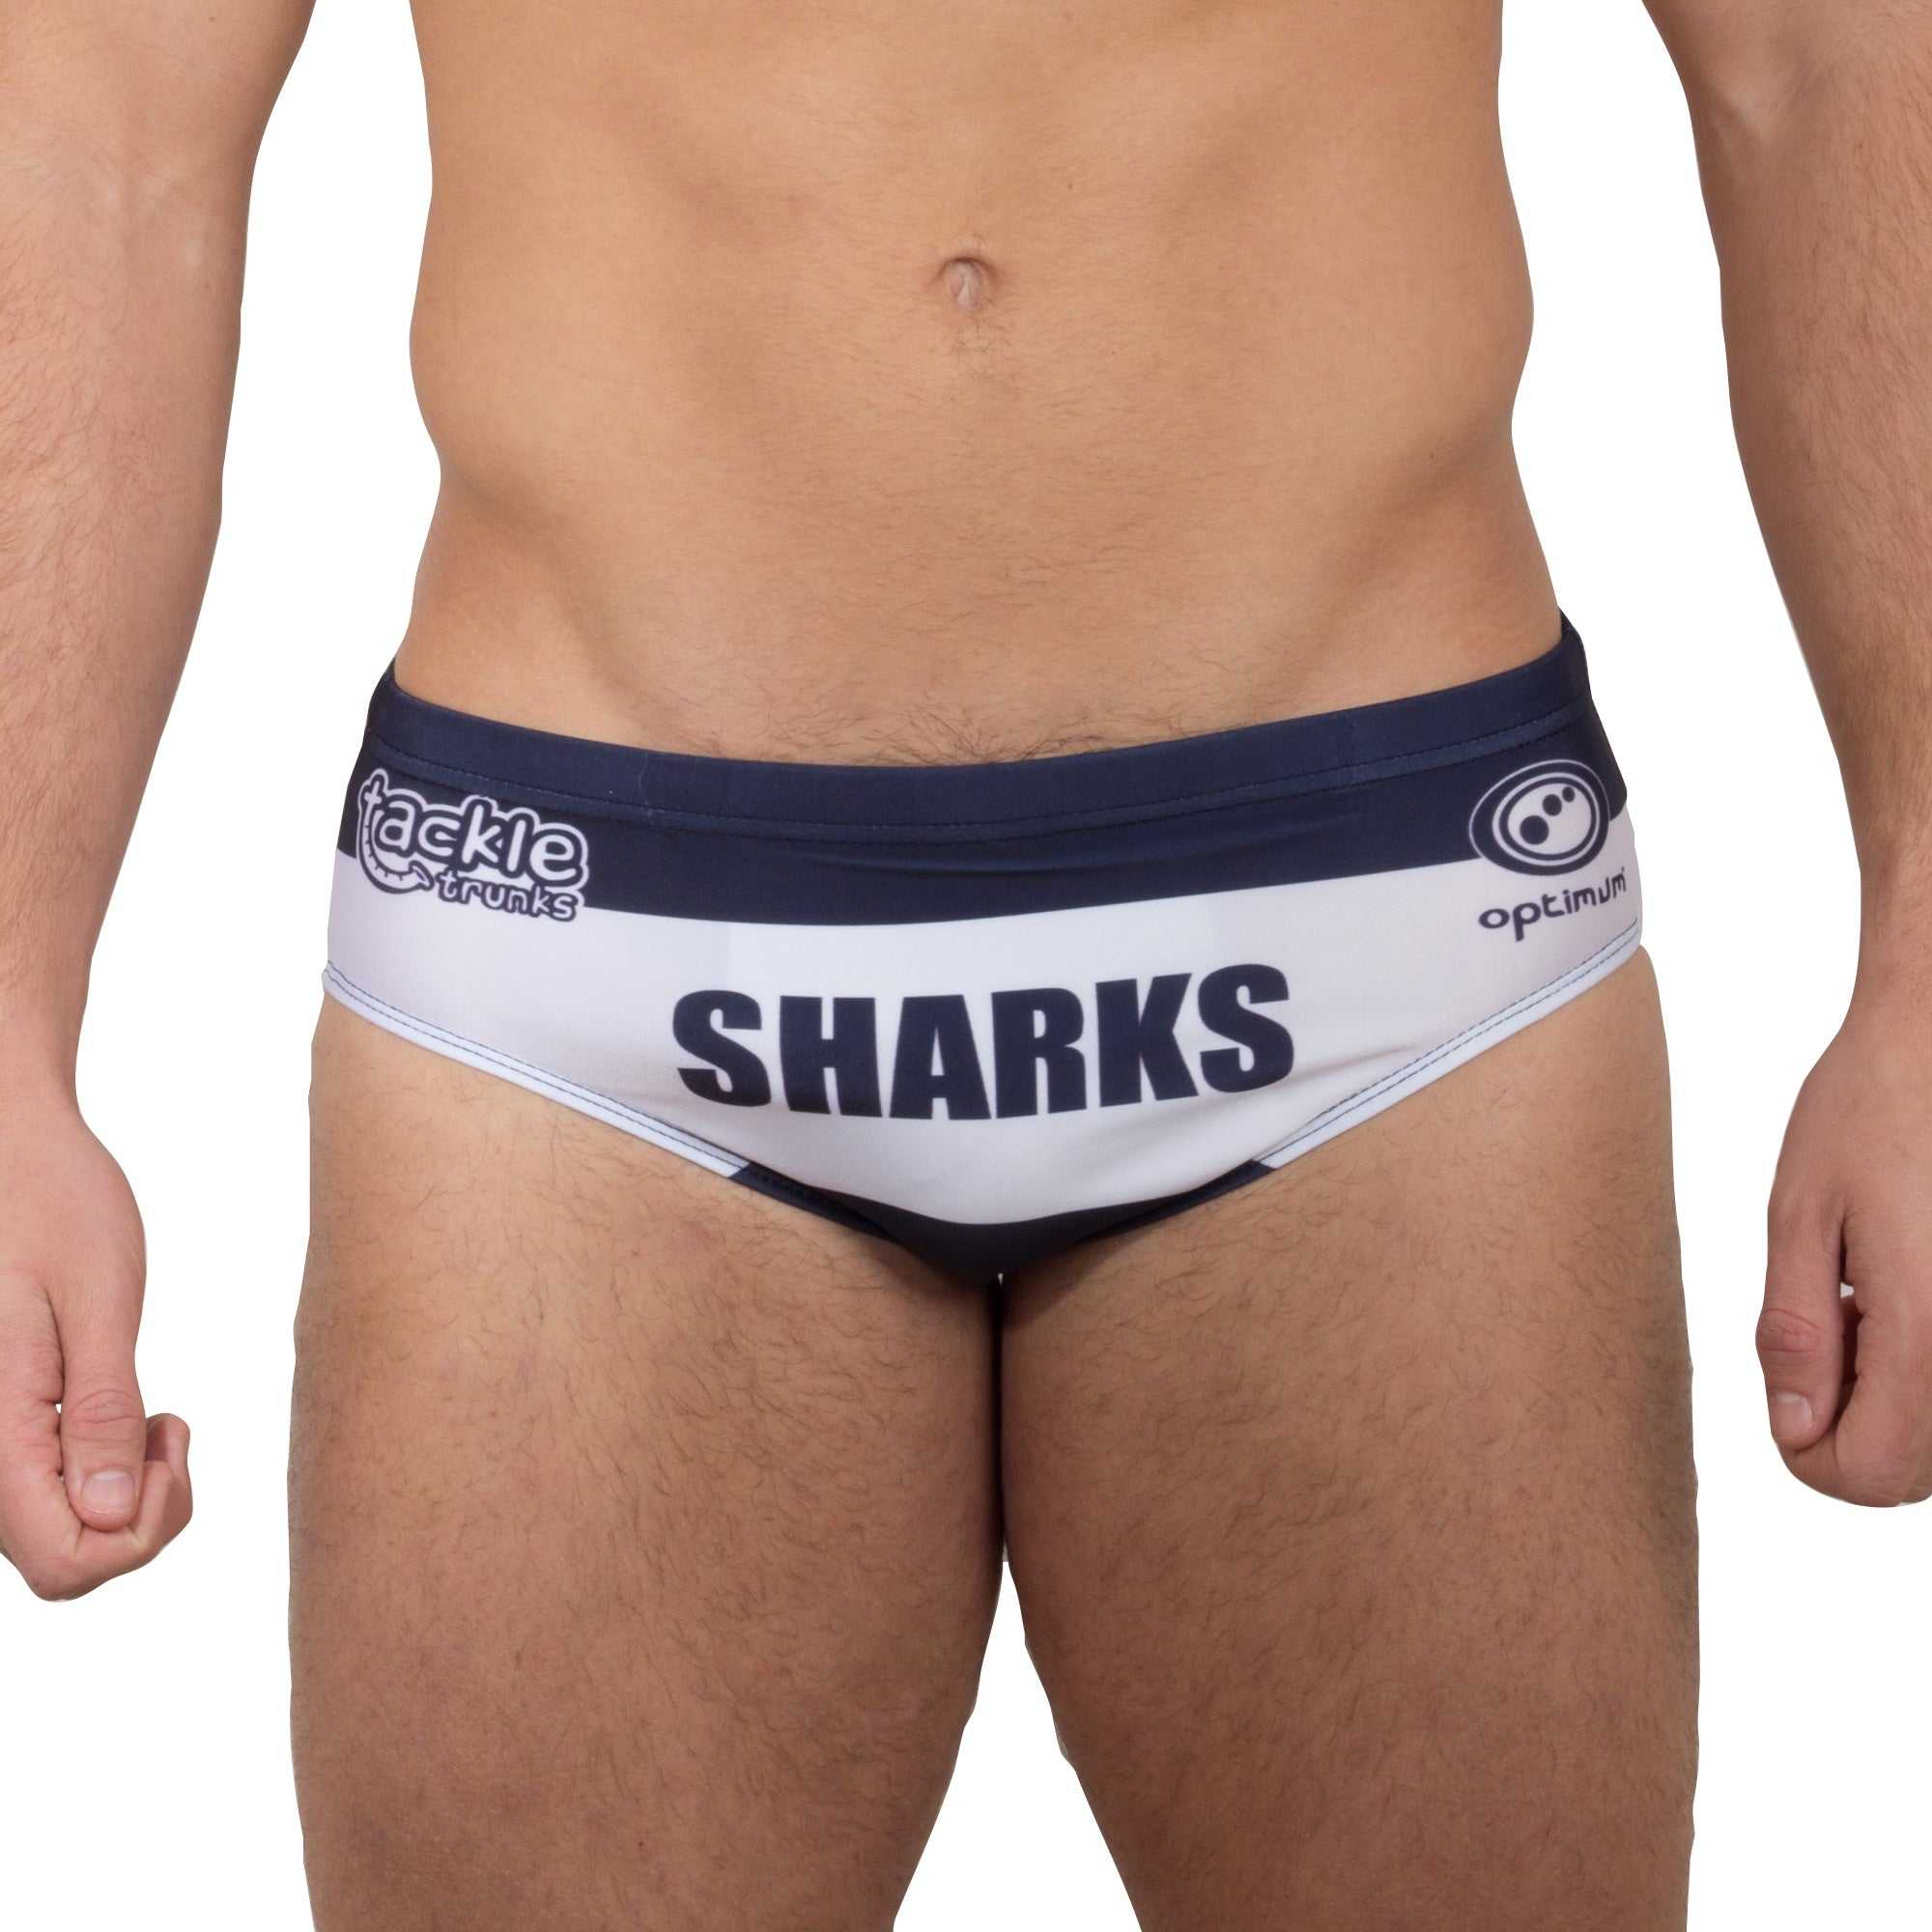 Sharks Tackle Trunks Rugby Union - Optimum